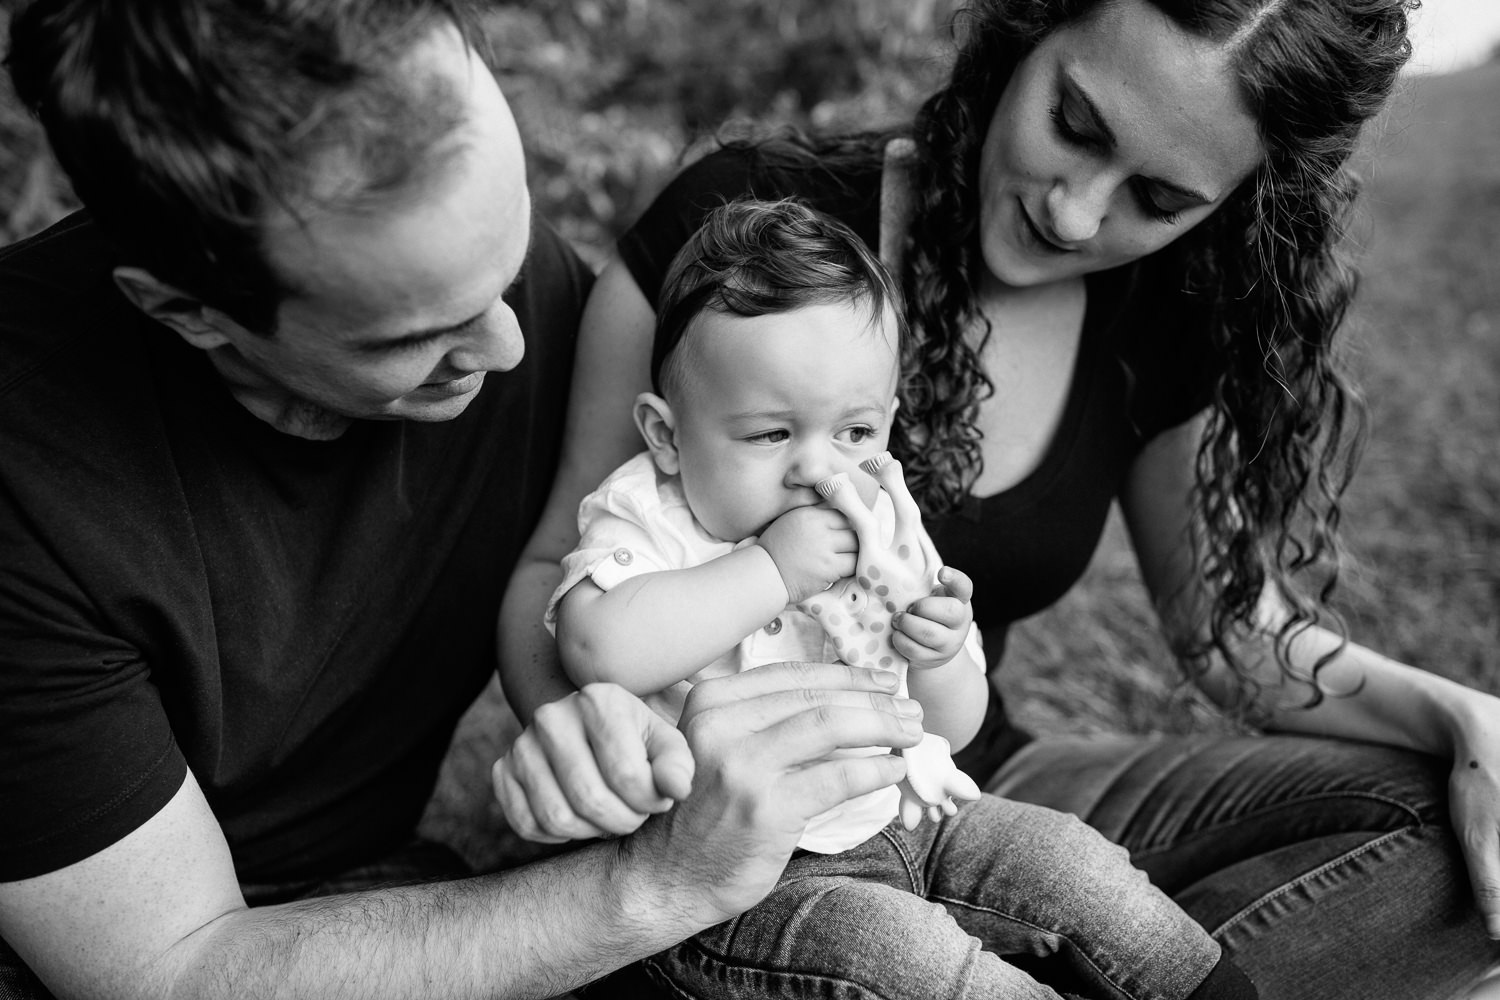 family of 3, 9 month old baby boy in white t-shirt and jeans sitting in mom's lap chewing on Sophie the giraffe, mother and father looking and smiling at son - York Region Golden Hour Photos